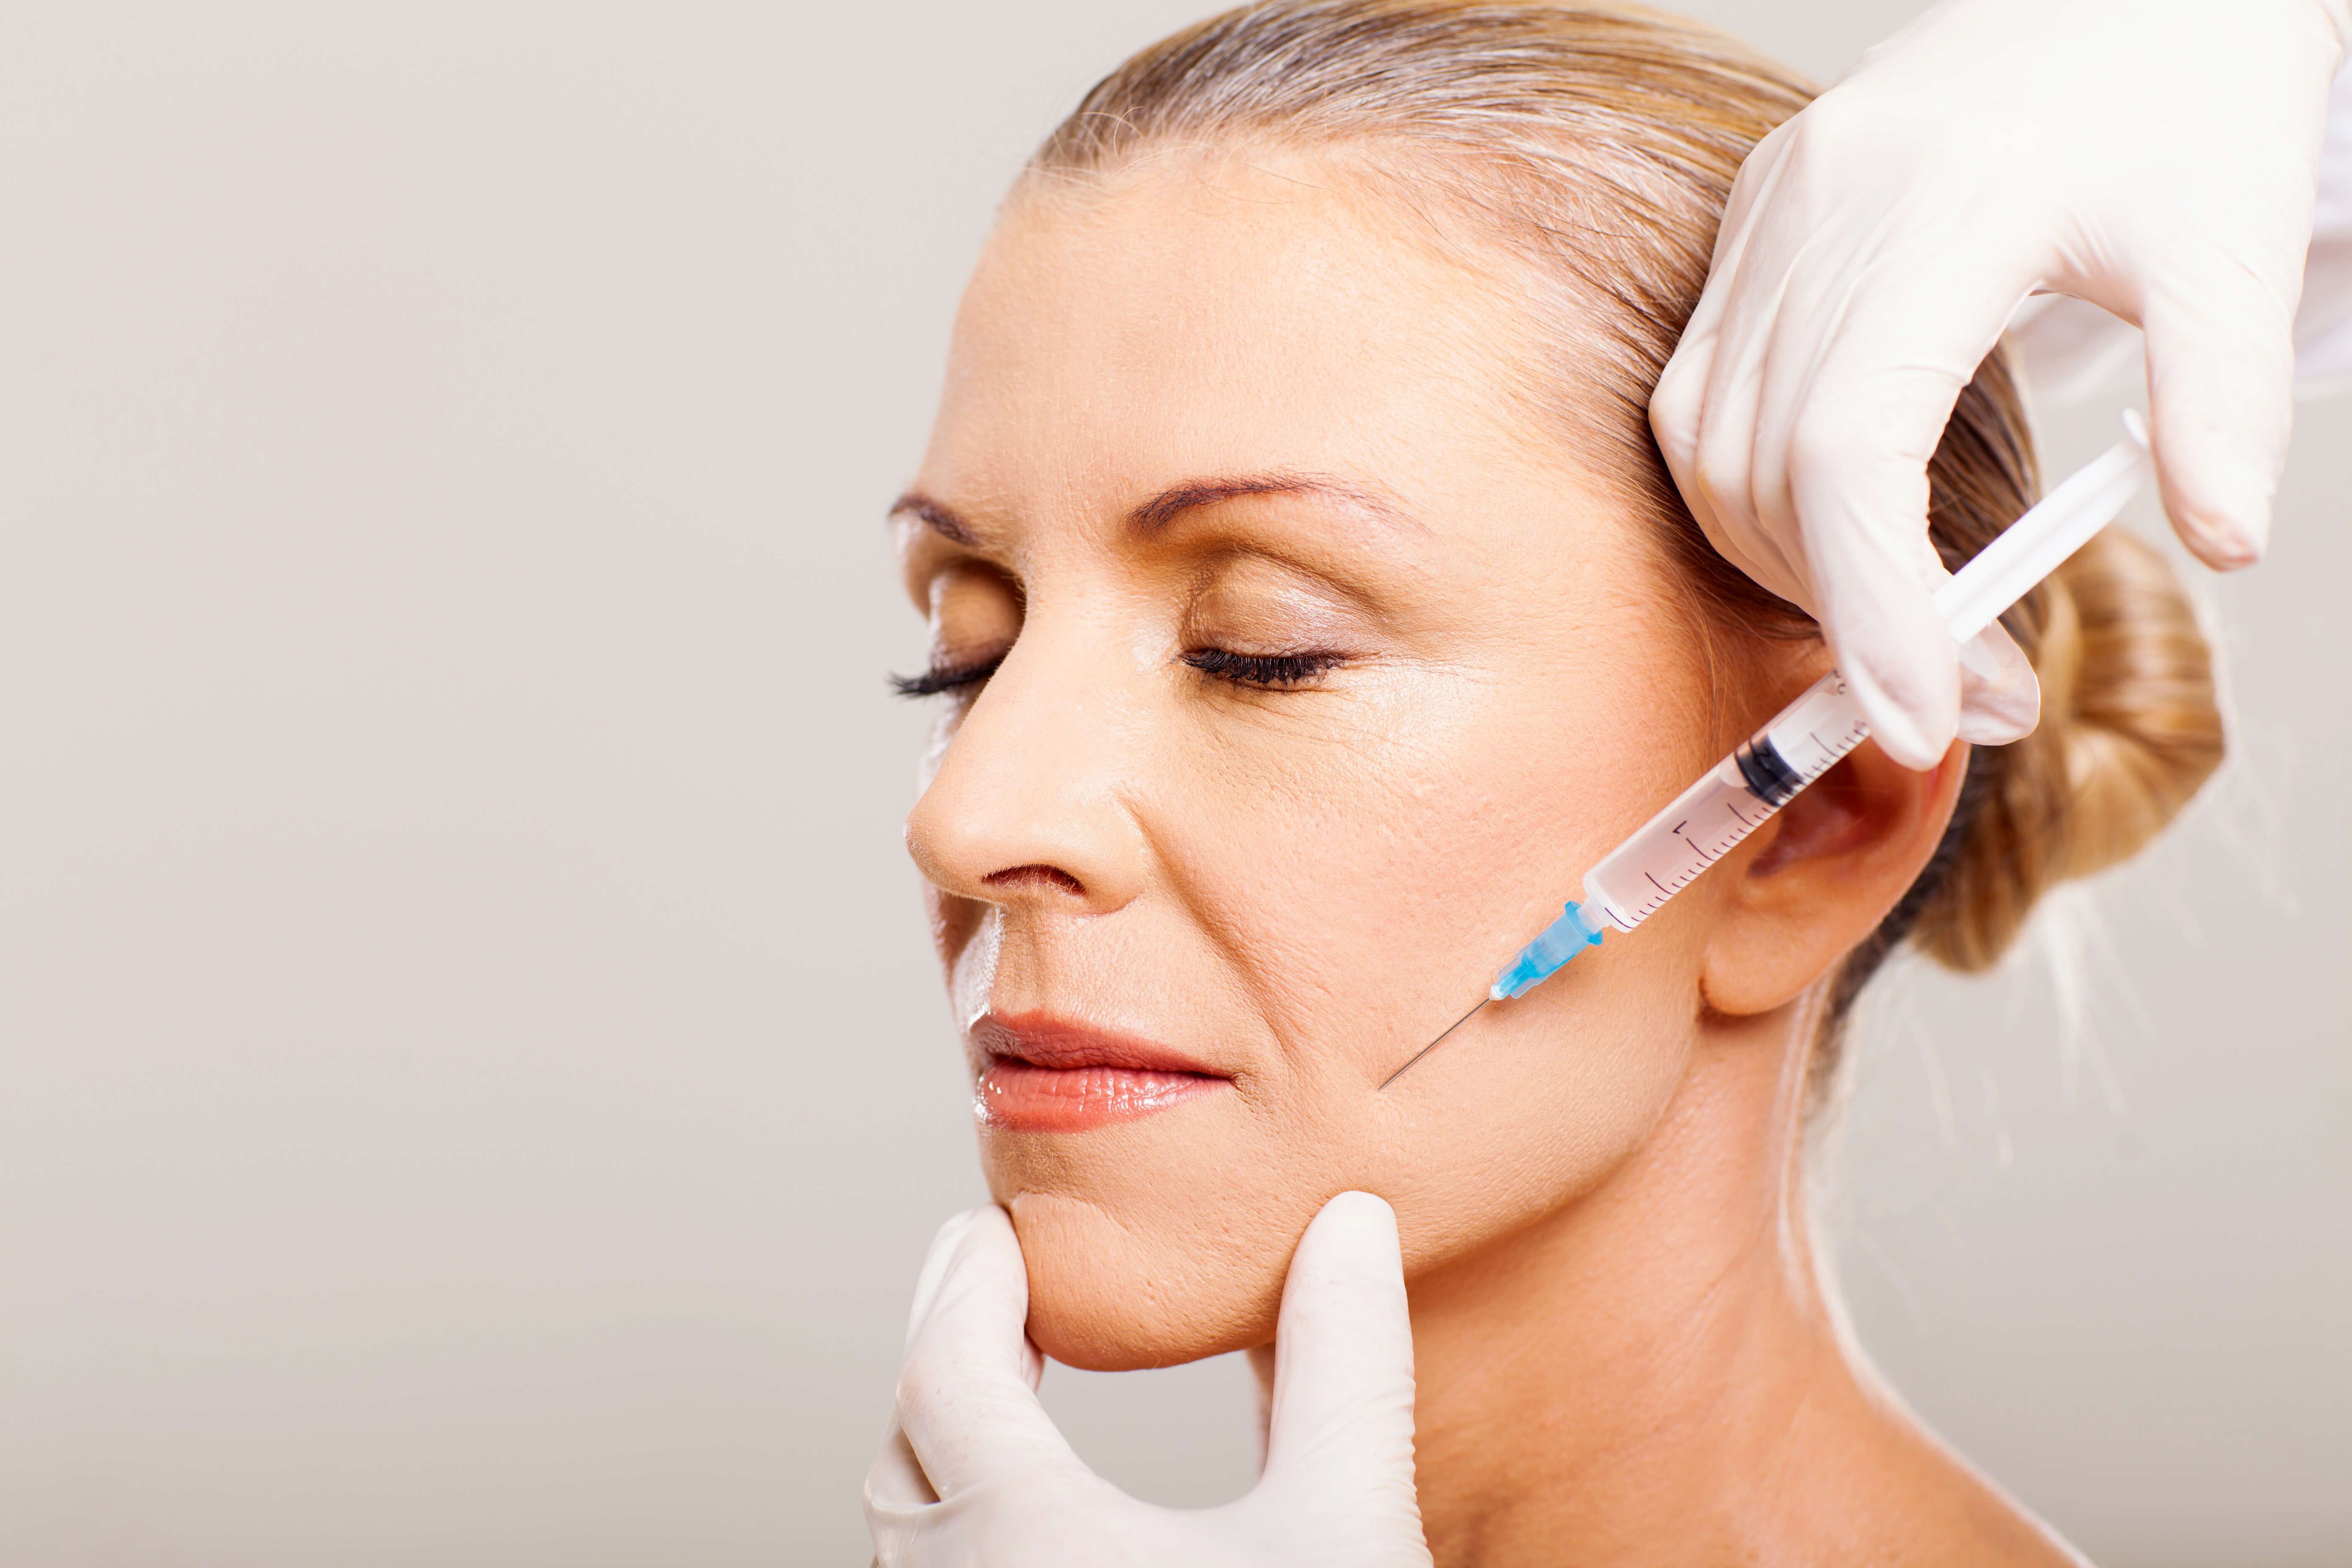 How Do Botox and Dysport Work?